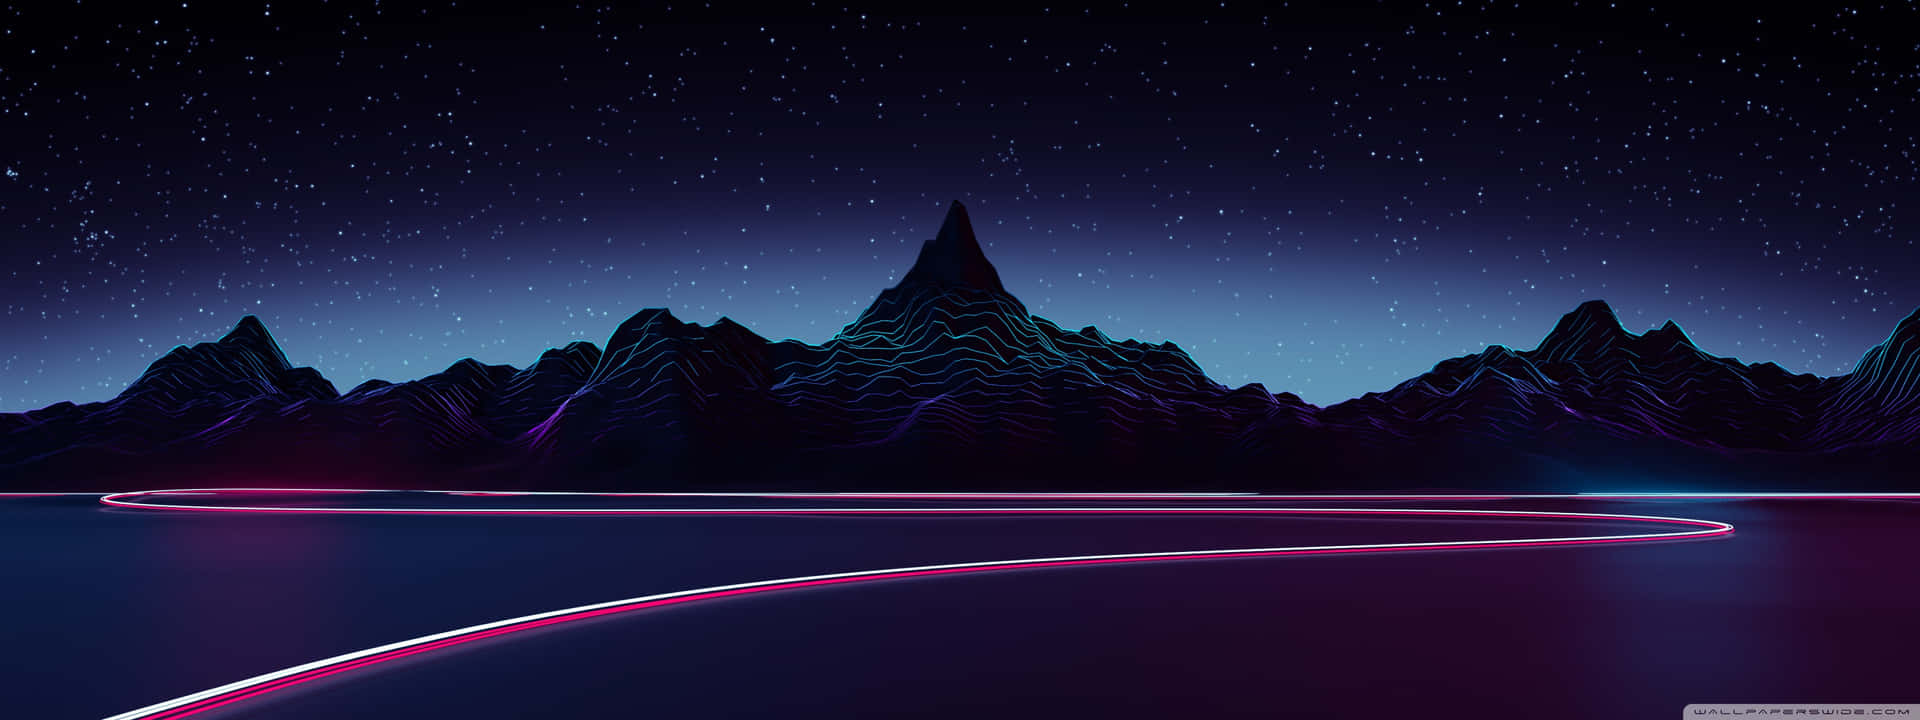 A Night Sky With A Neon Light And Mountains Wallpaper